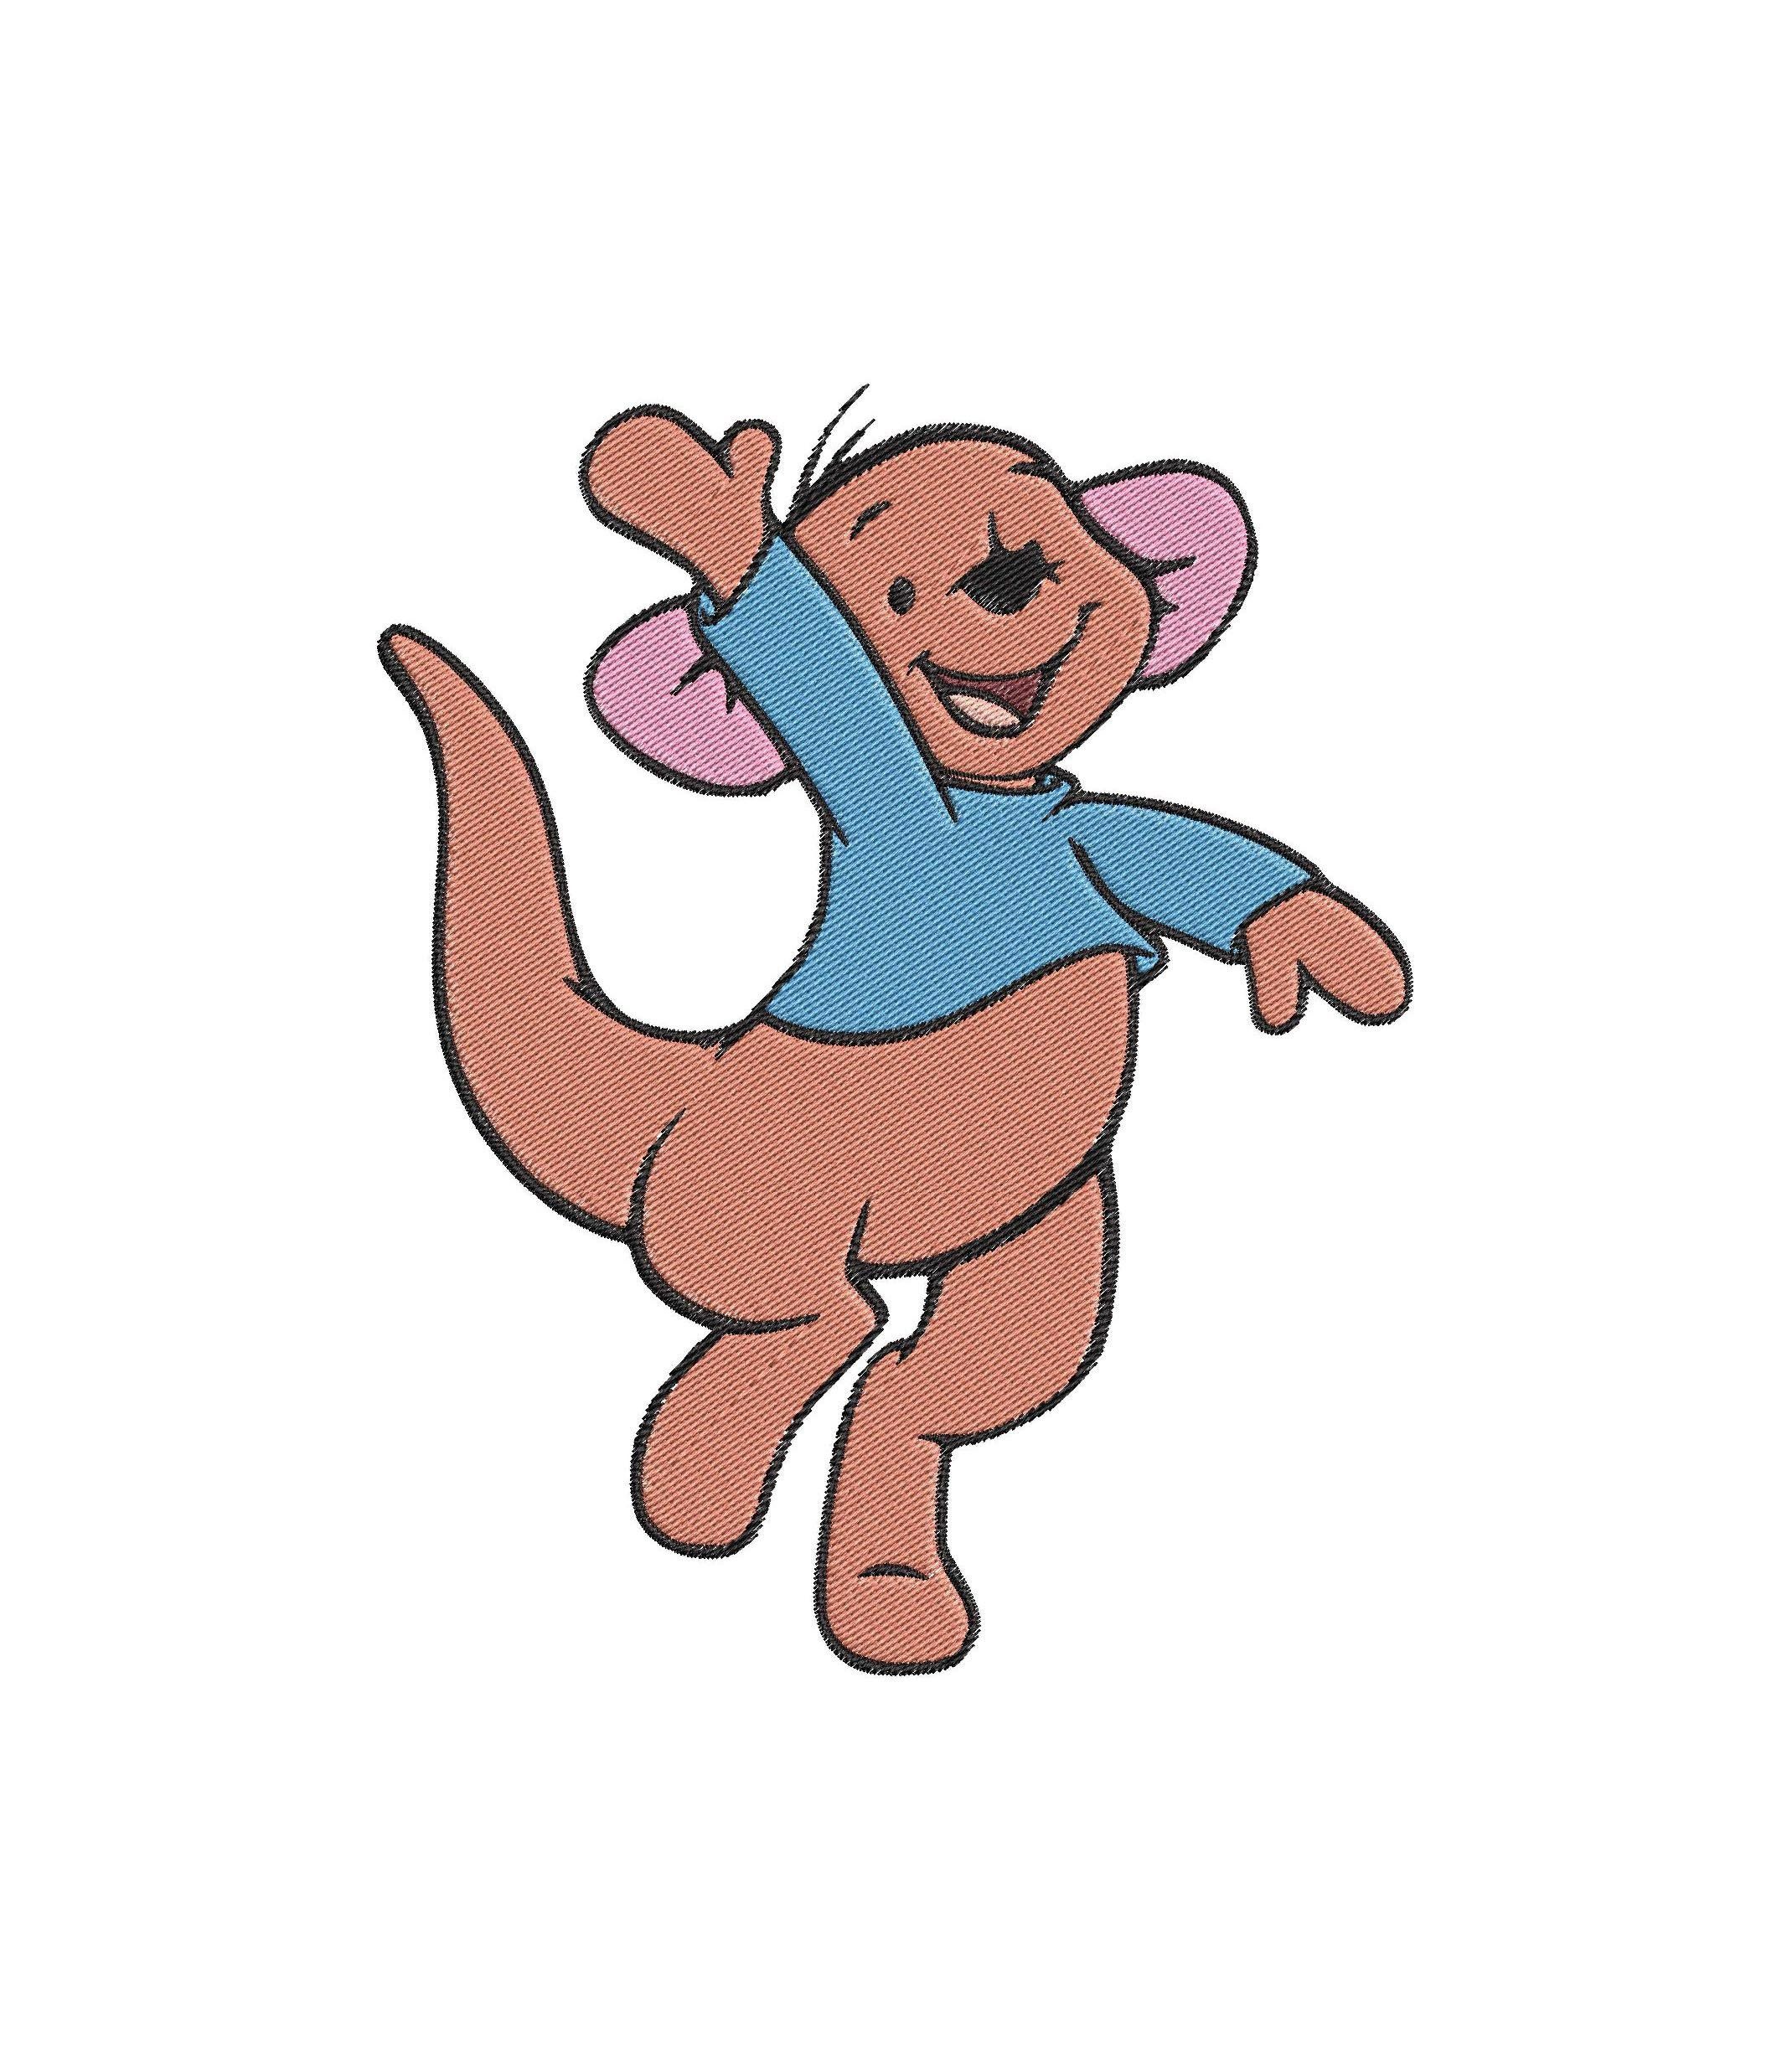 Baby Roo, Winnie-the-Pooh animation, Fill embroidery design, Winnie the Pooh drawing, 2140x2460 HD Handy